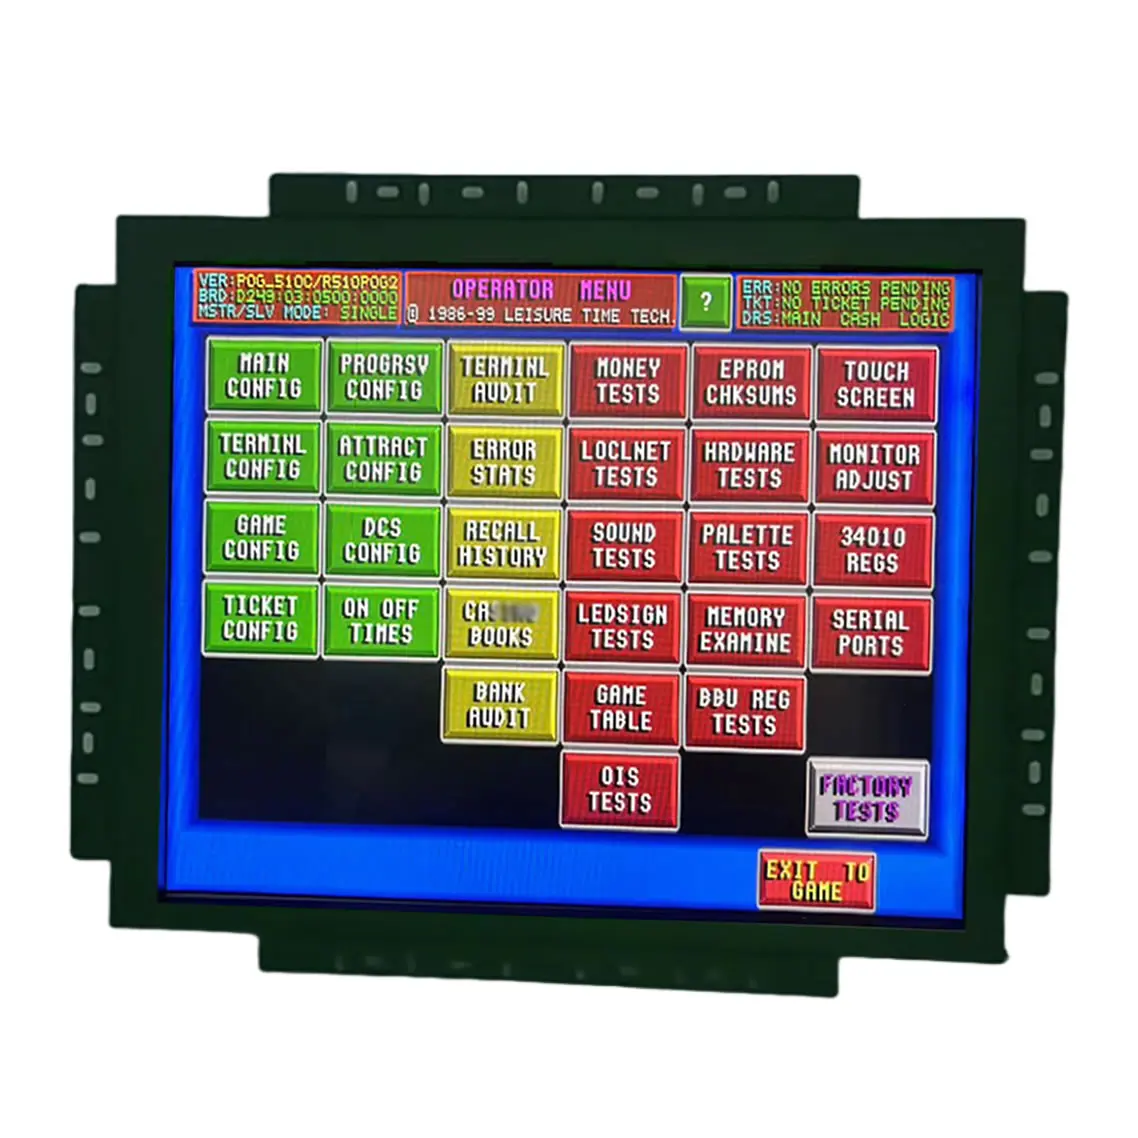 19 22 24 27 32 43 inch capacitive touch screen pog game monitor with LED light for slot coin operated gaming machine